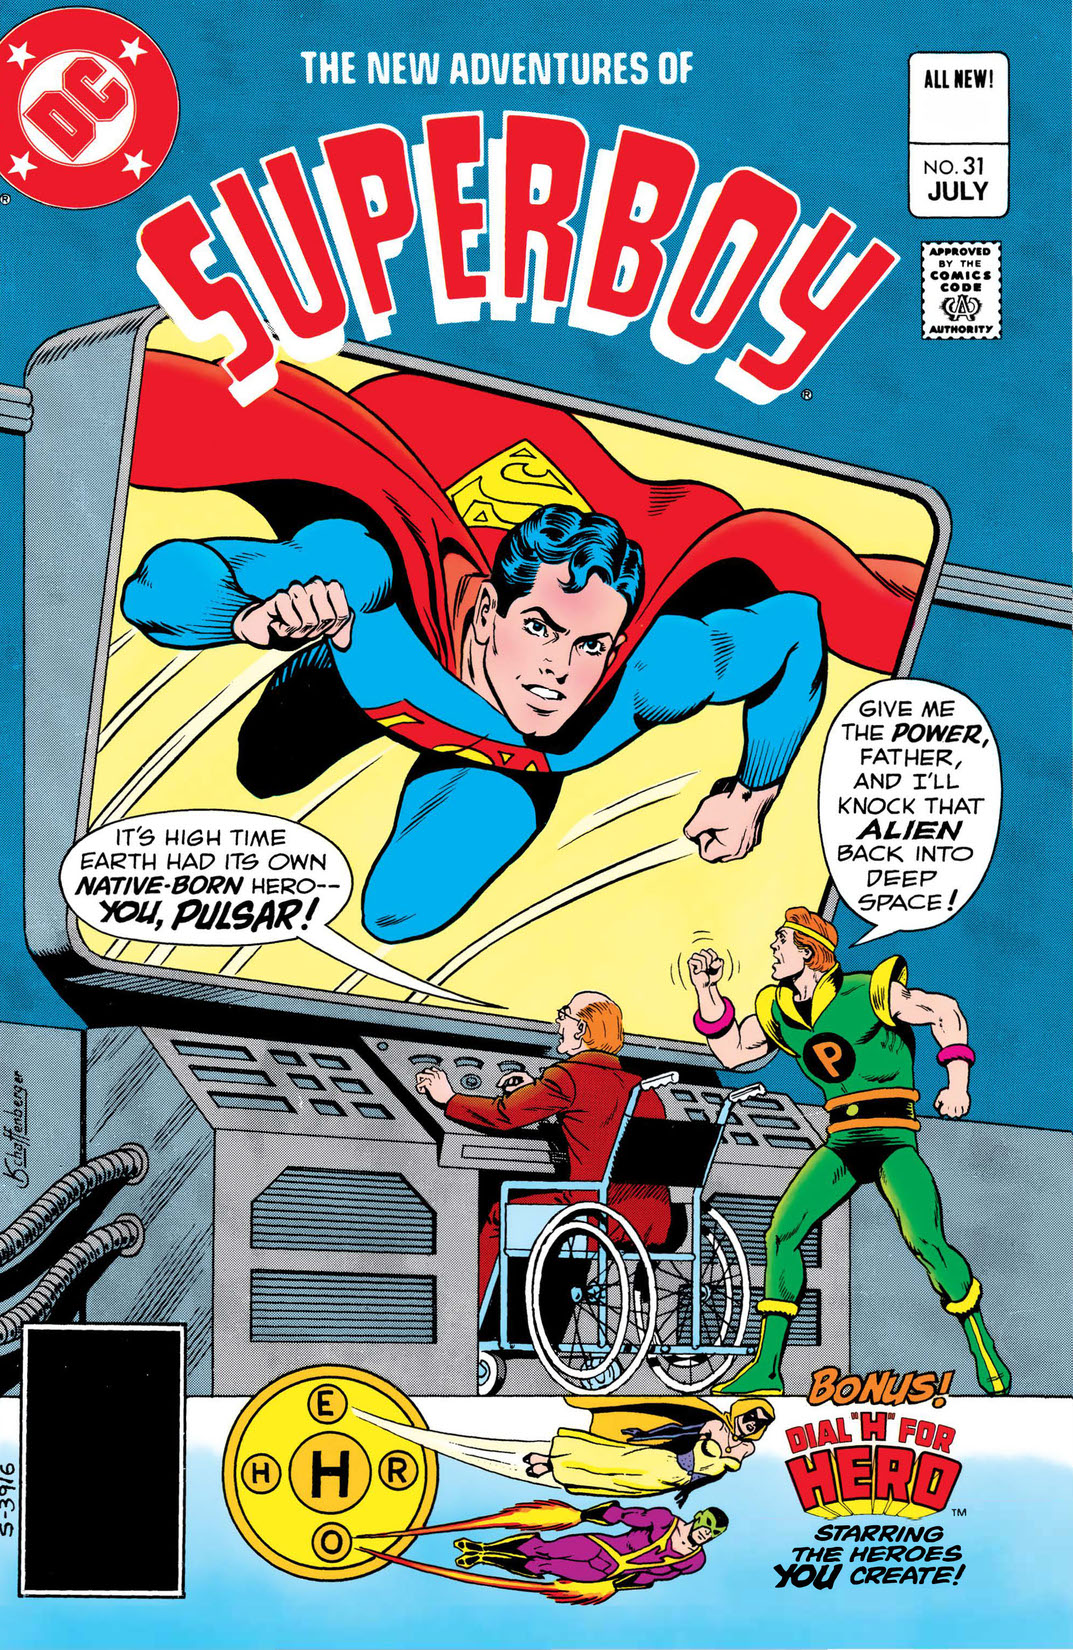 New Adventures of Superboy #31 preview images